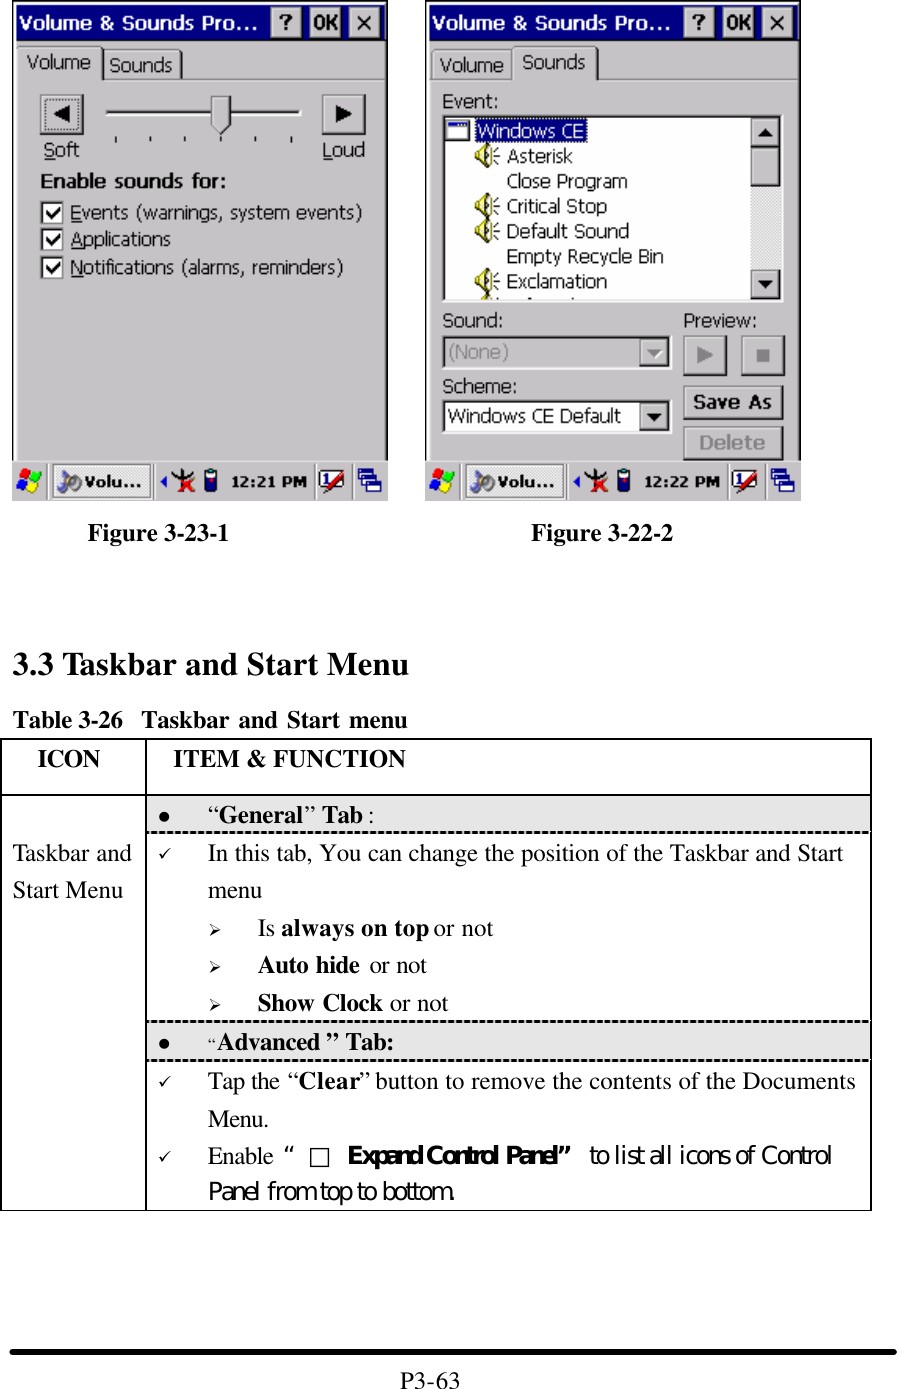             Figure 3-23-1                        Figure 3-22-2   3.3 Taskbar and Start Menu Table 3-26  Taskbar and Start menu   ICON  ITEM &amp; FUNCTION l “General” Tab :   ü In this tab, You can change the position of the Taskbar and Start menu   Ø Is always on top or not Ø Auto hide or not Ø Show Clock or not l “Advanced ” Tab:    Taskbar and Start Menu ü Tap the “Clear” button to remove the contents of the Documents Menu. ü Enable “□ Expand Control Panel” to list all icons of Control Panel from top to bottom.     P3-63 